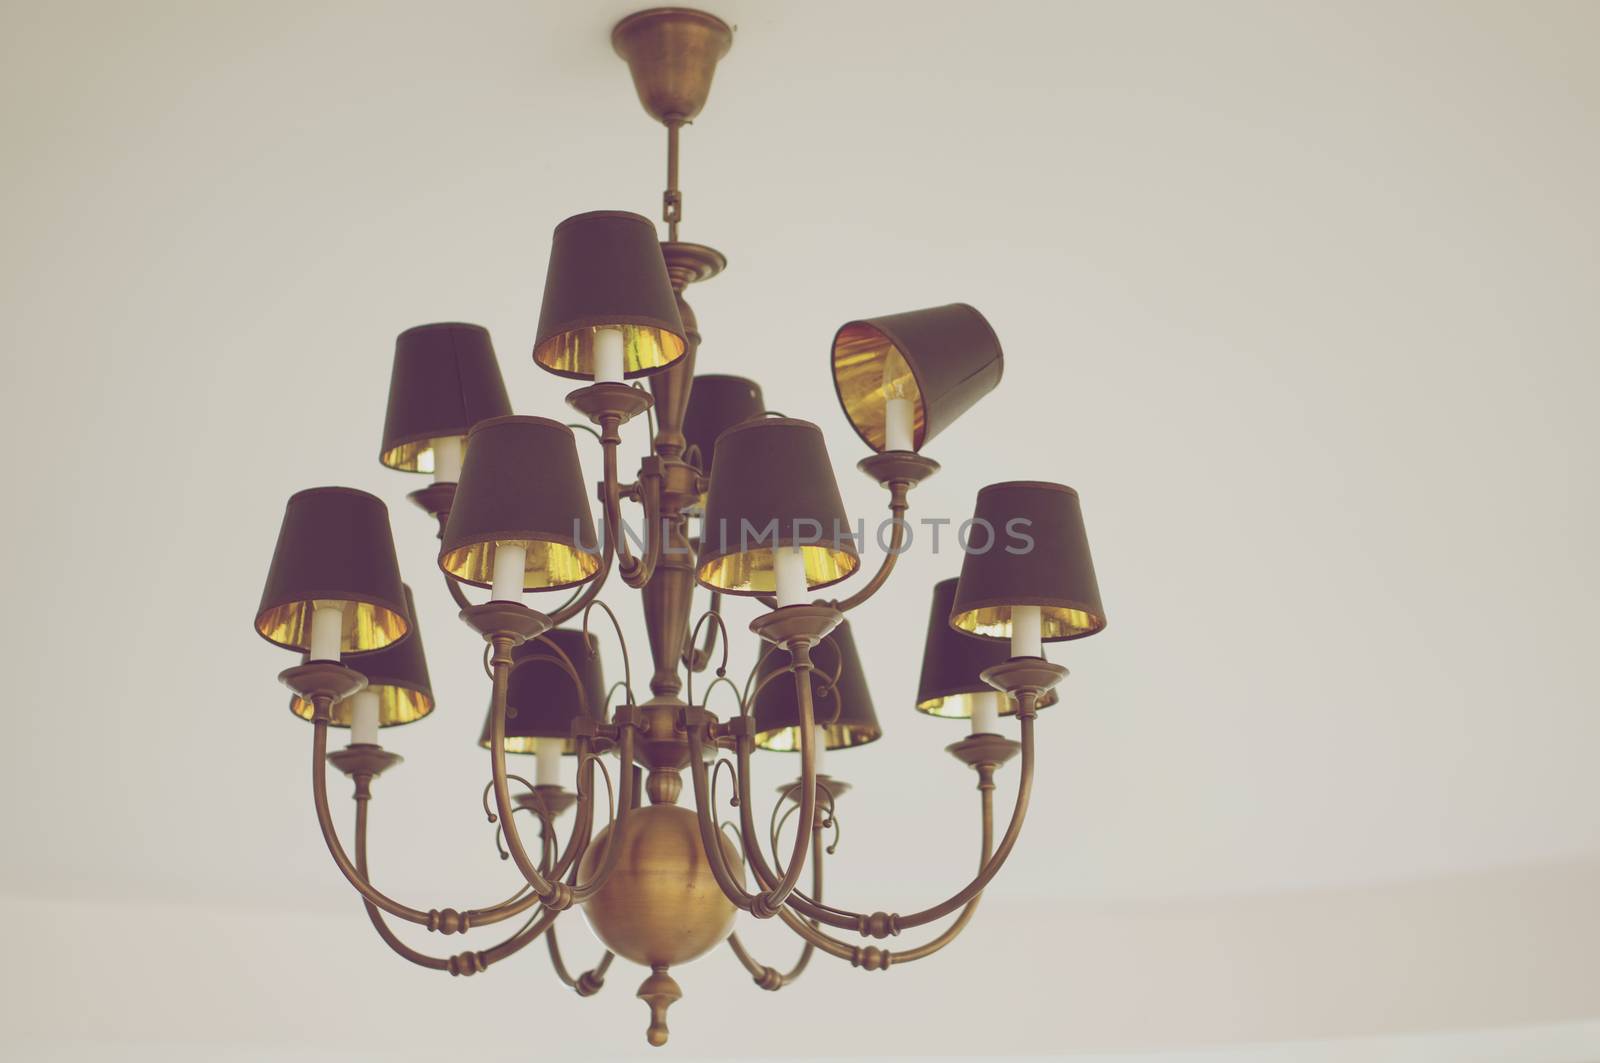 Chandelier made from brass on white ceiling in vintage style.